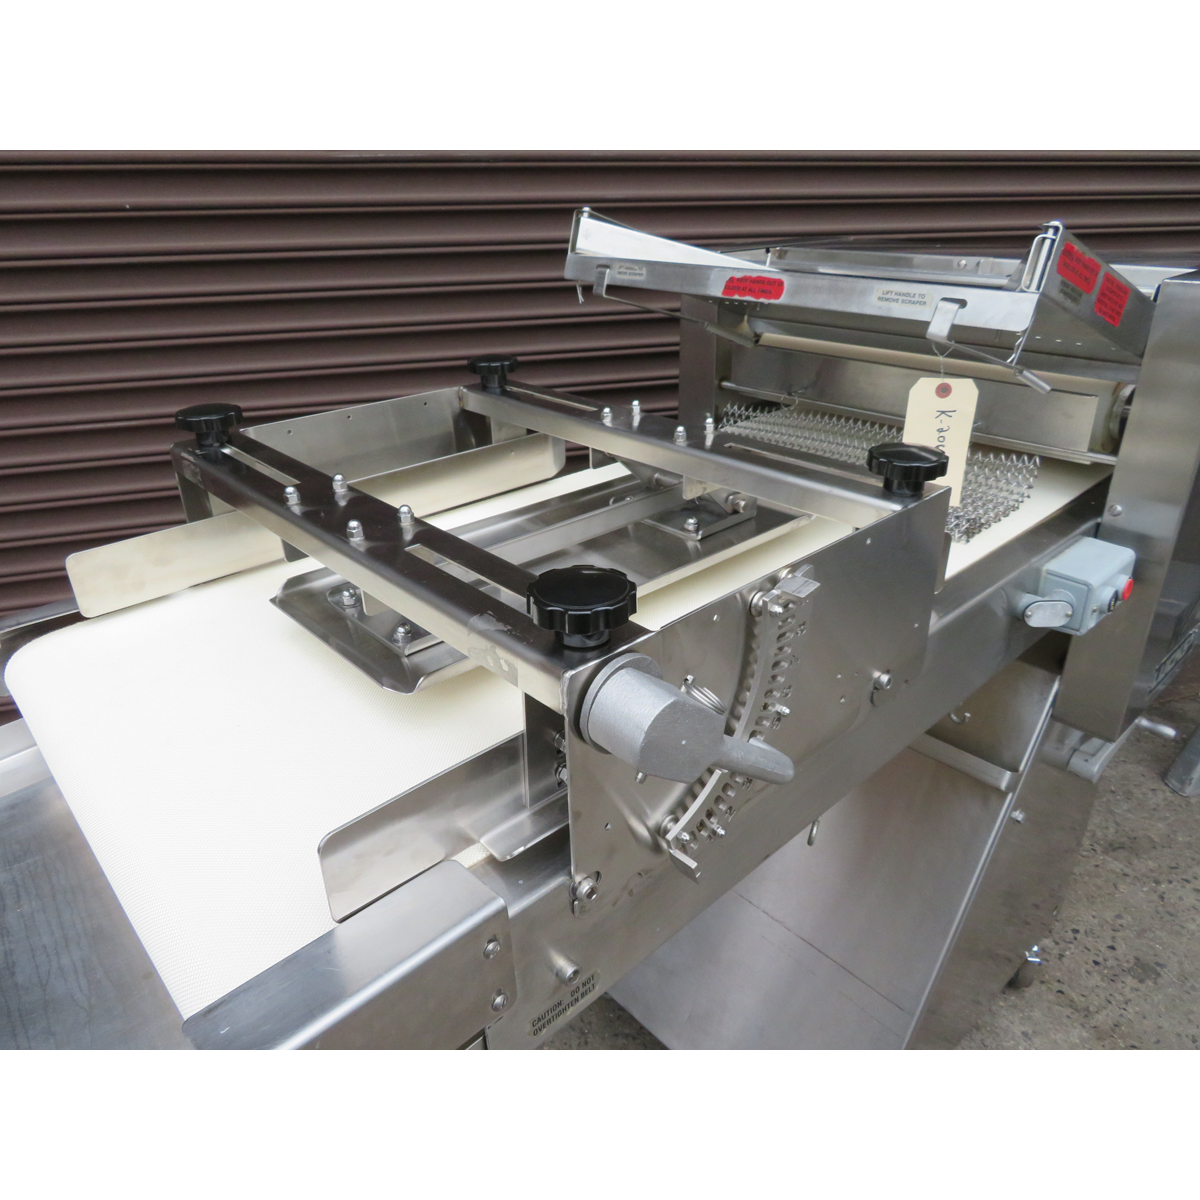 Lucks LSM-20 Moulder Sheeter, Plate size 9", Used Great Condition image 1